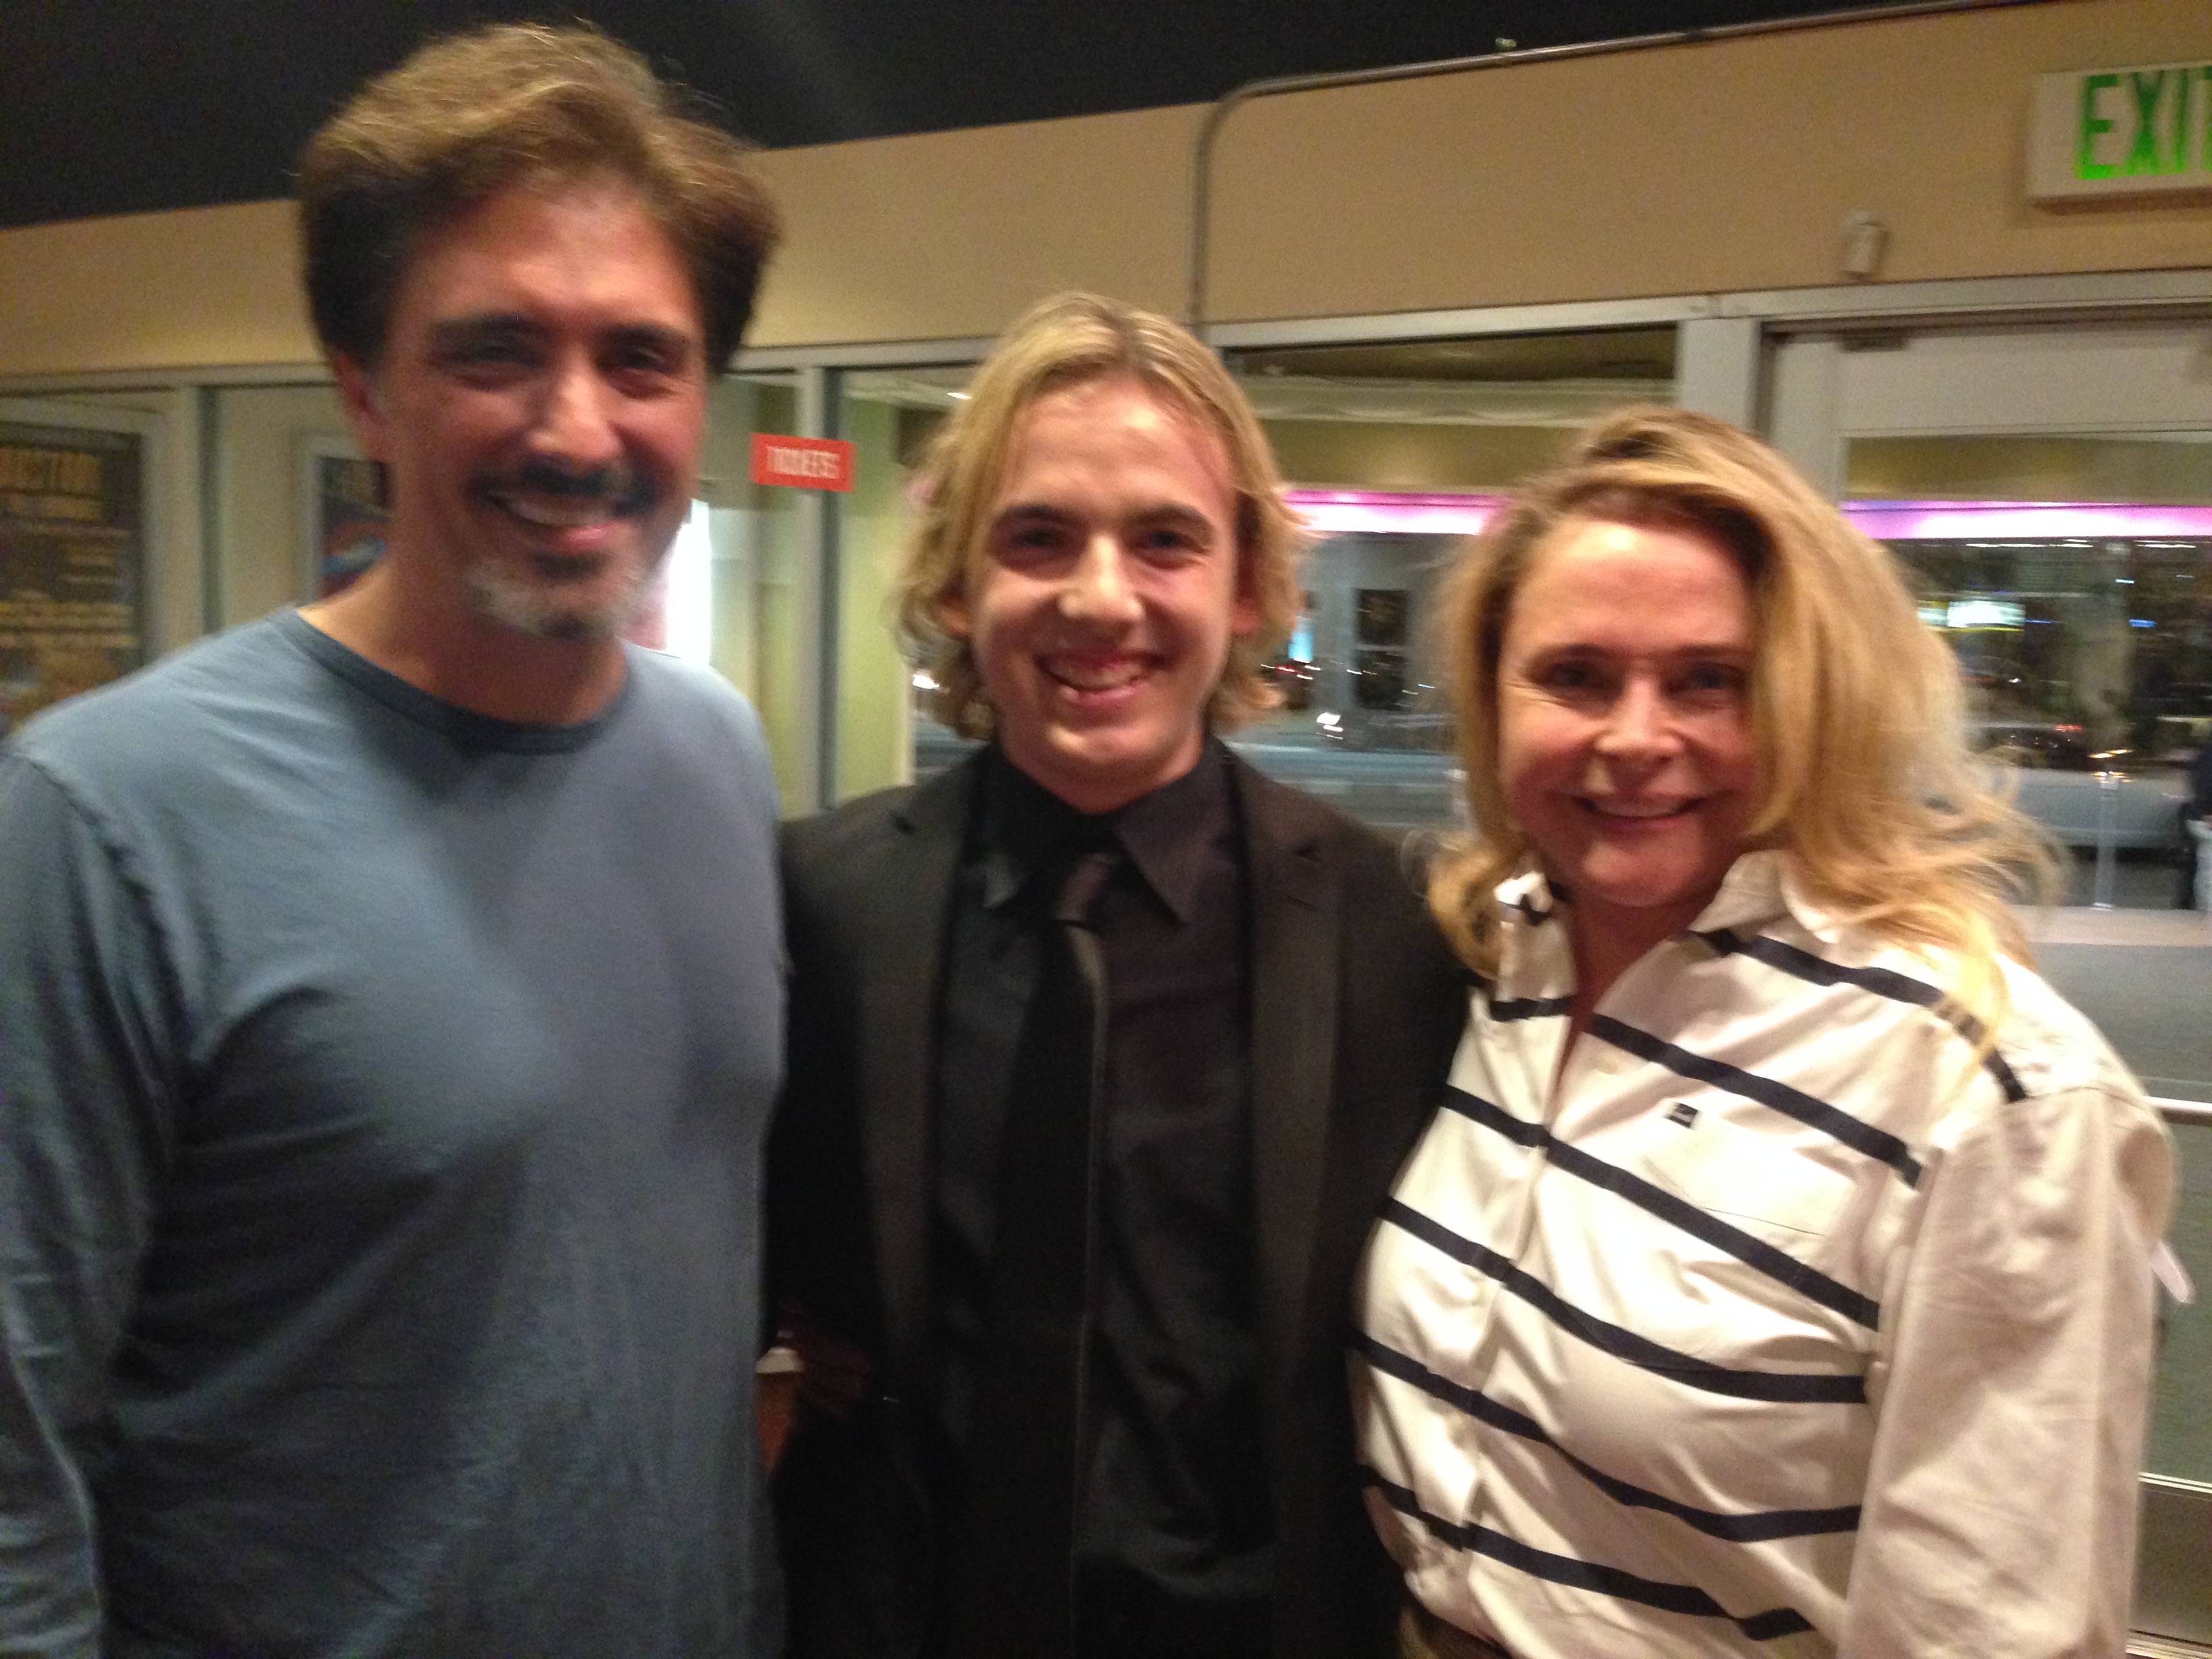 Adam with Ted Monte and Priscilla Barnes at the Robbys.